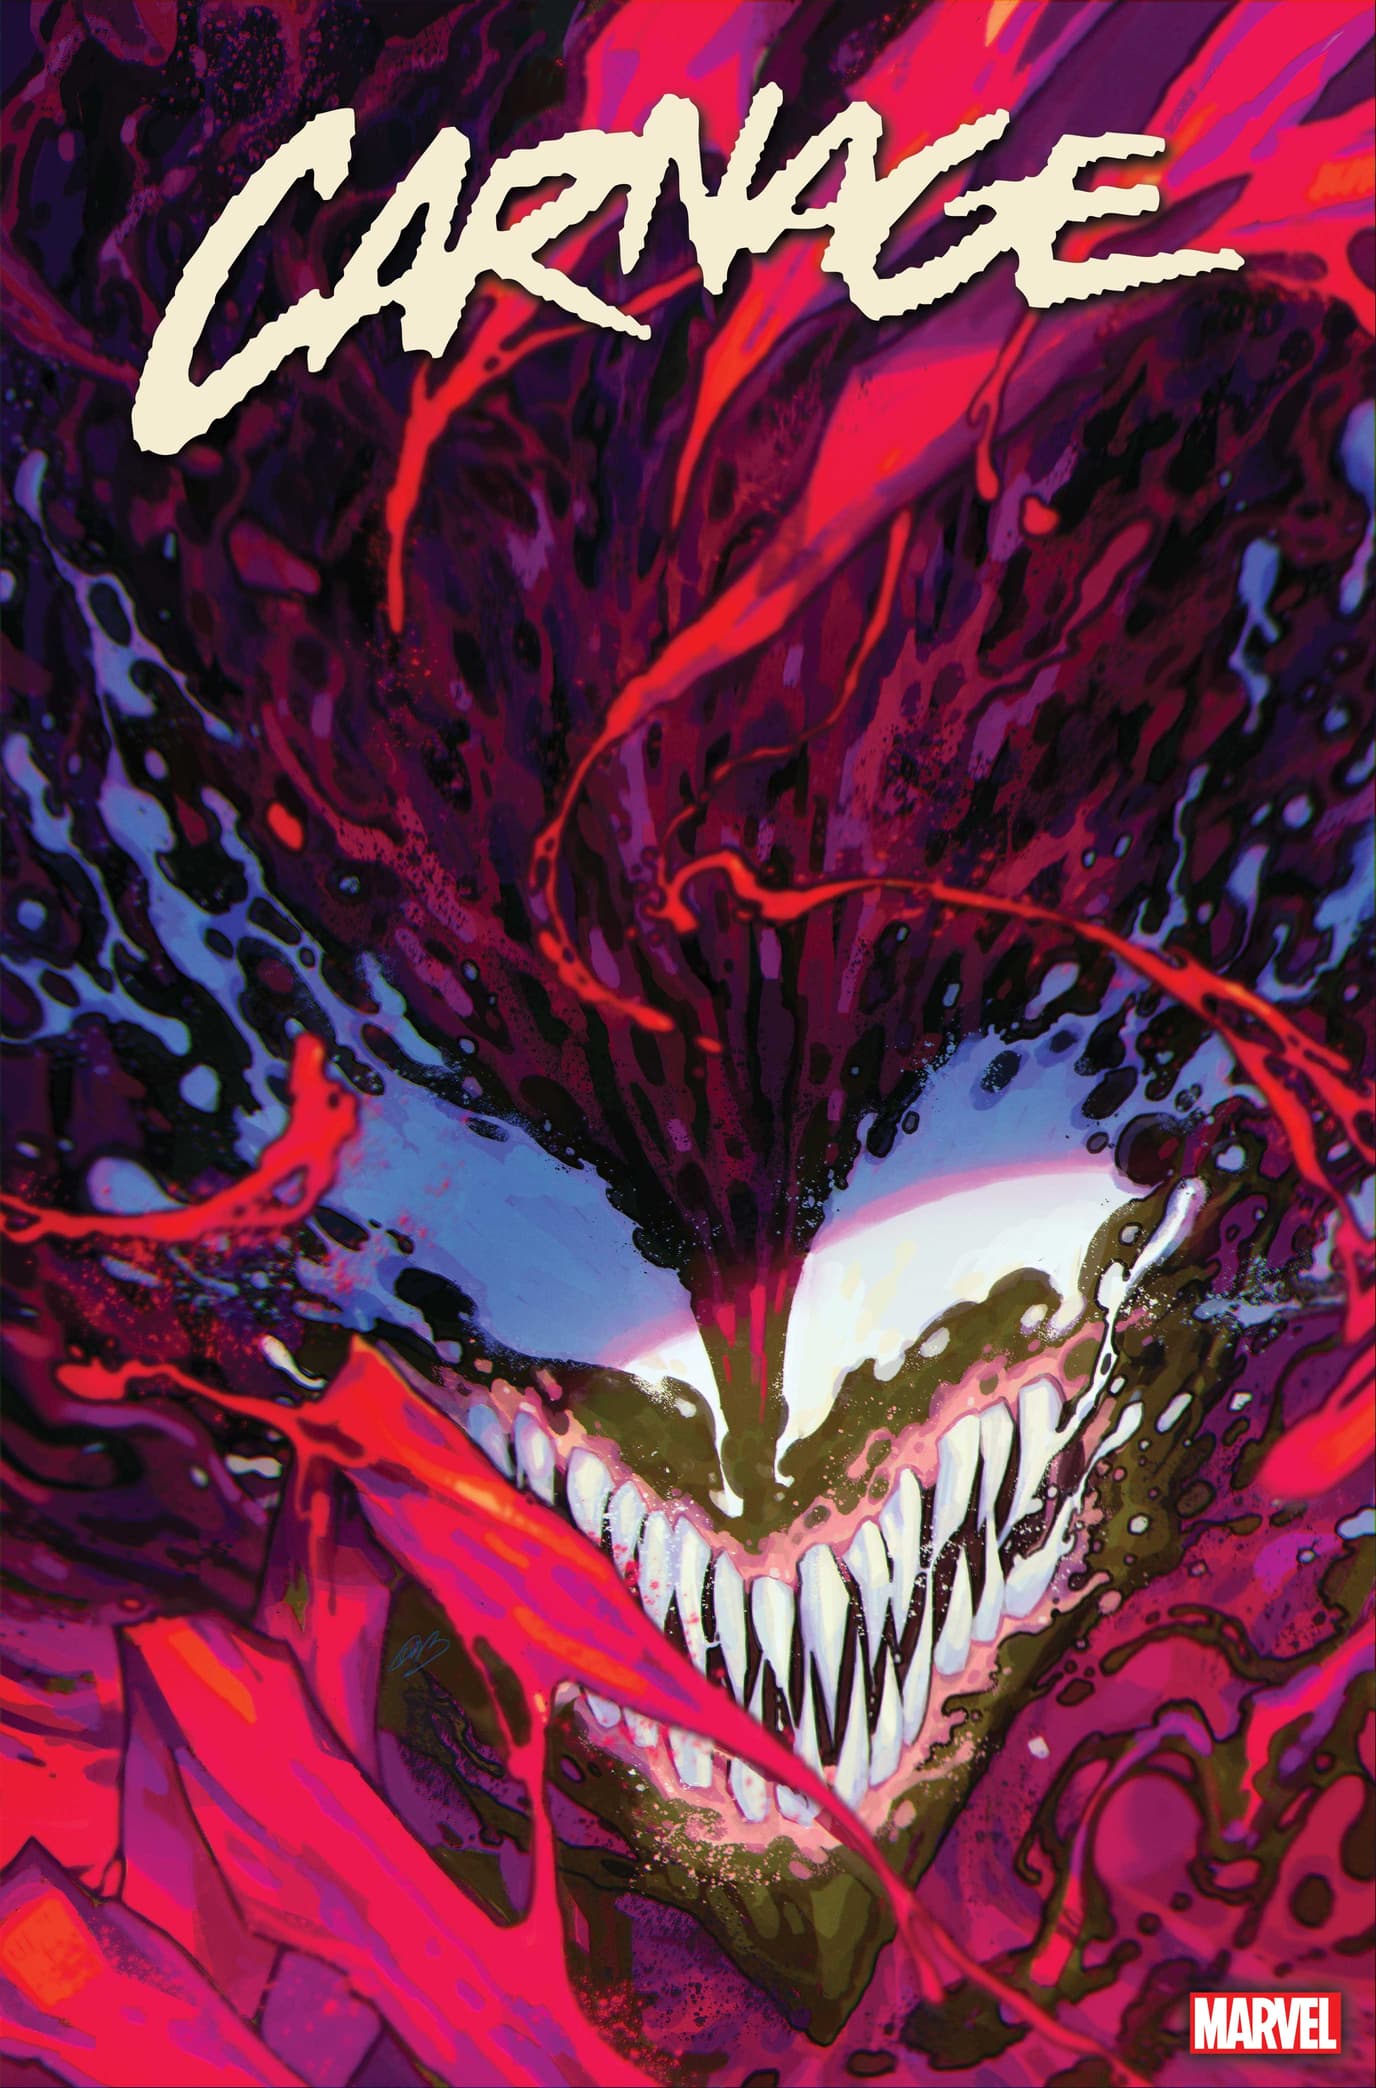 CARNAGE #1 variant cover by Rose Besch